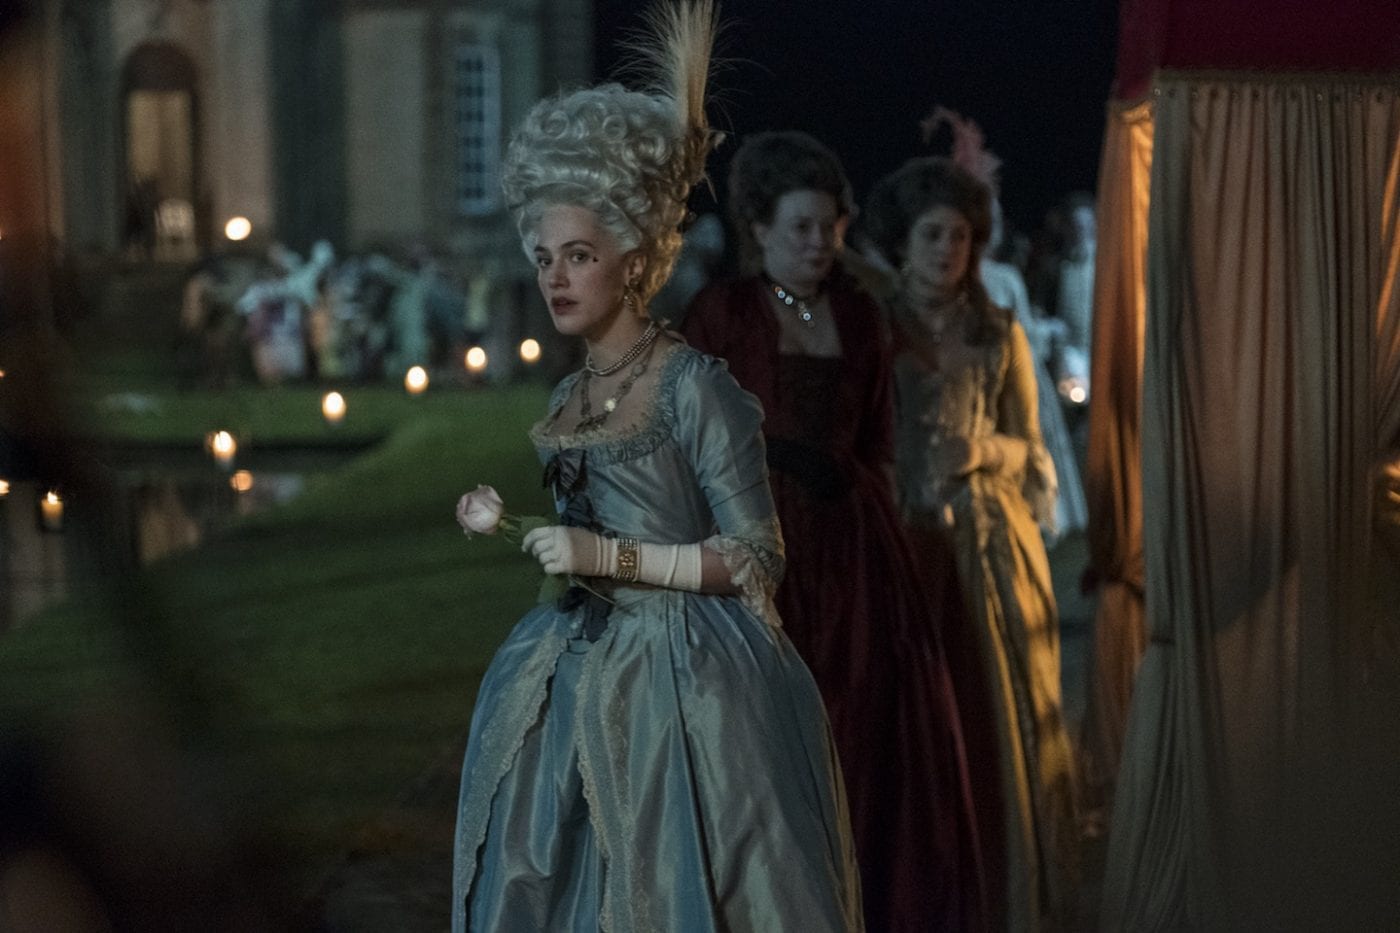 Harlots S2 is only on Showmax